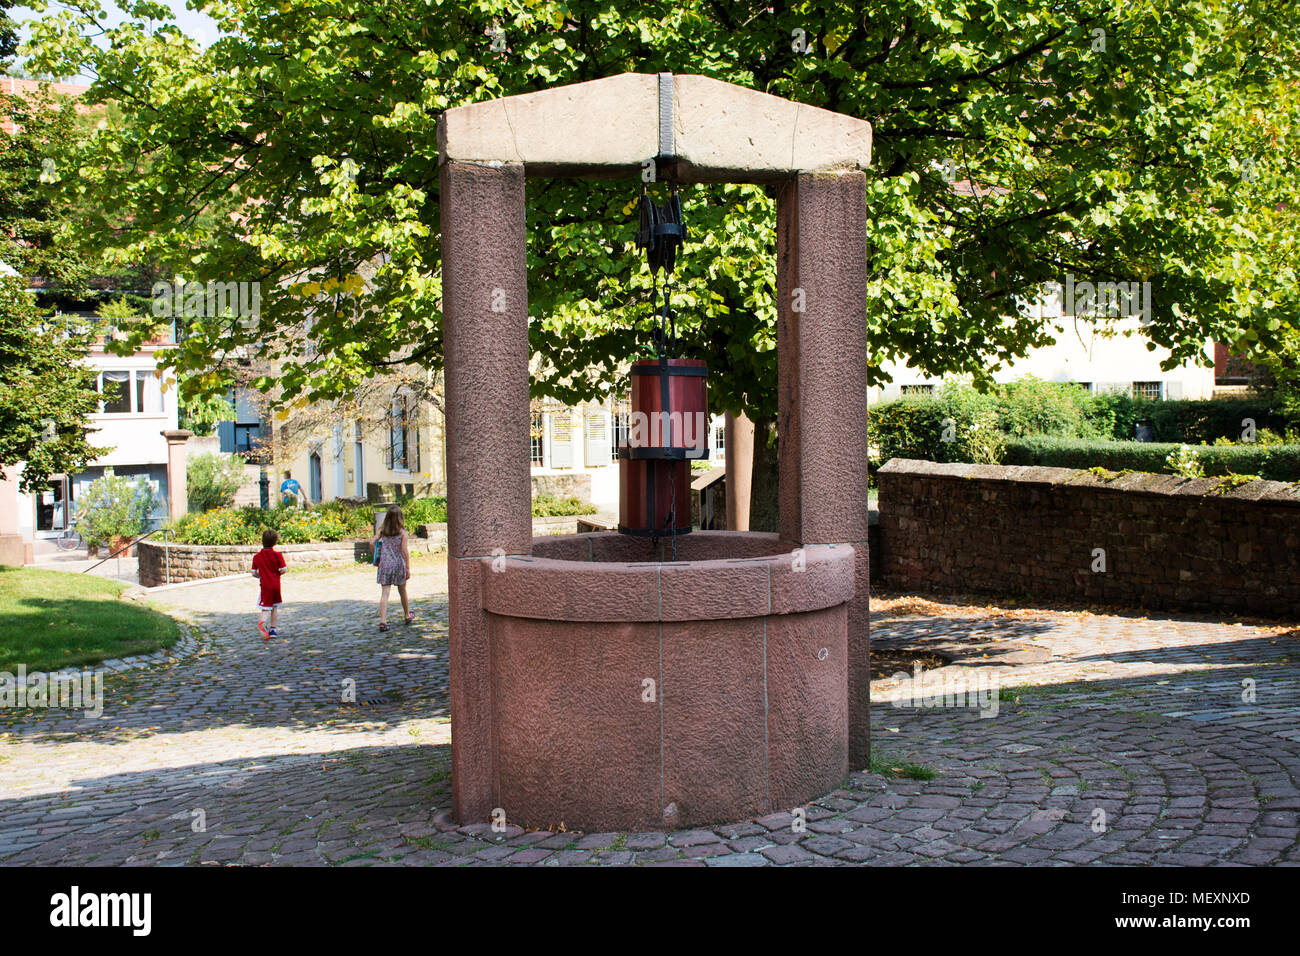 Classic dug water well at garden outdoor for german people and foreigner travelers visit and travel at Ladenburg town on August 28, 2017 in Baden-wurt Stock Photo